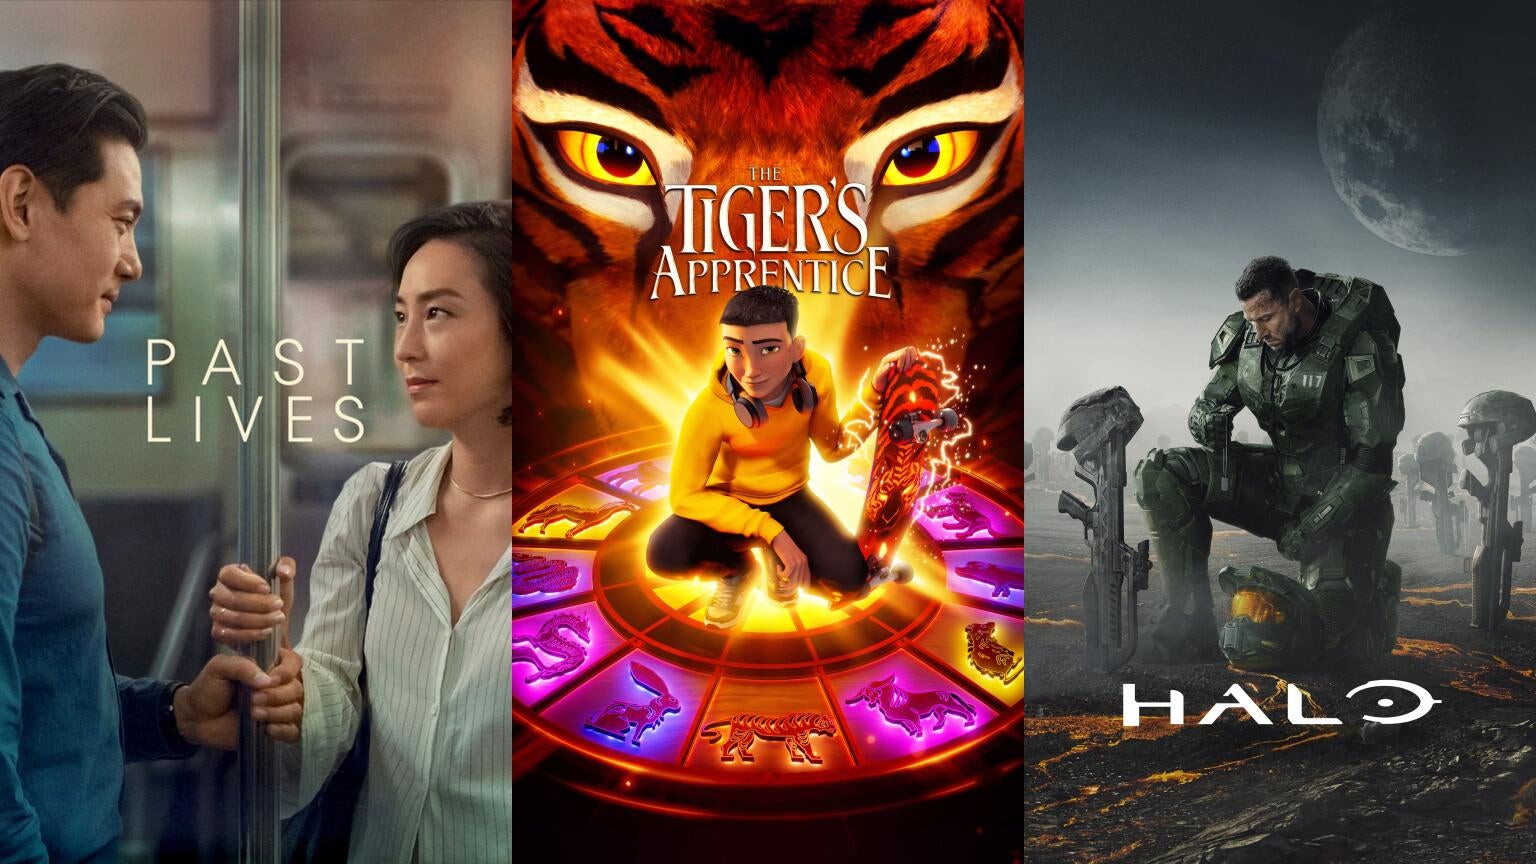 Posters for "Past Lives," "The Tiger's Apprentice," and "Halo"